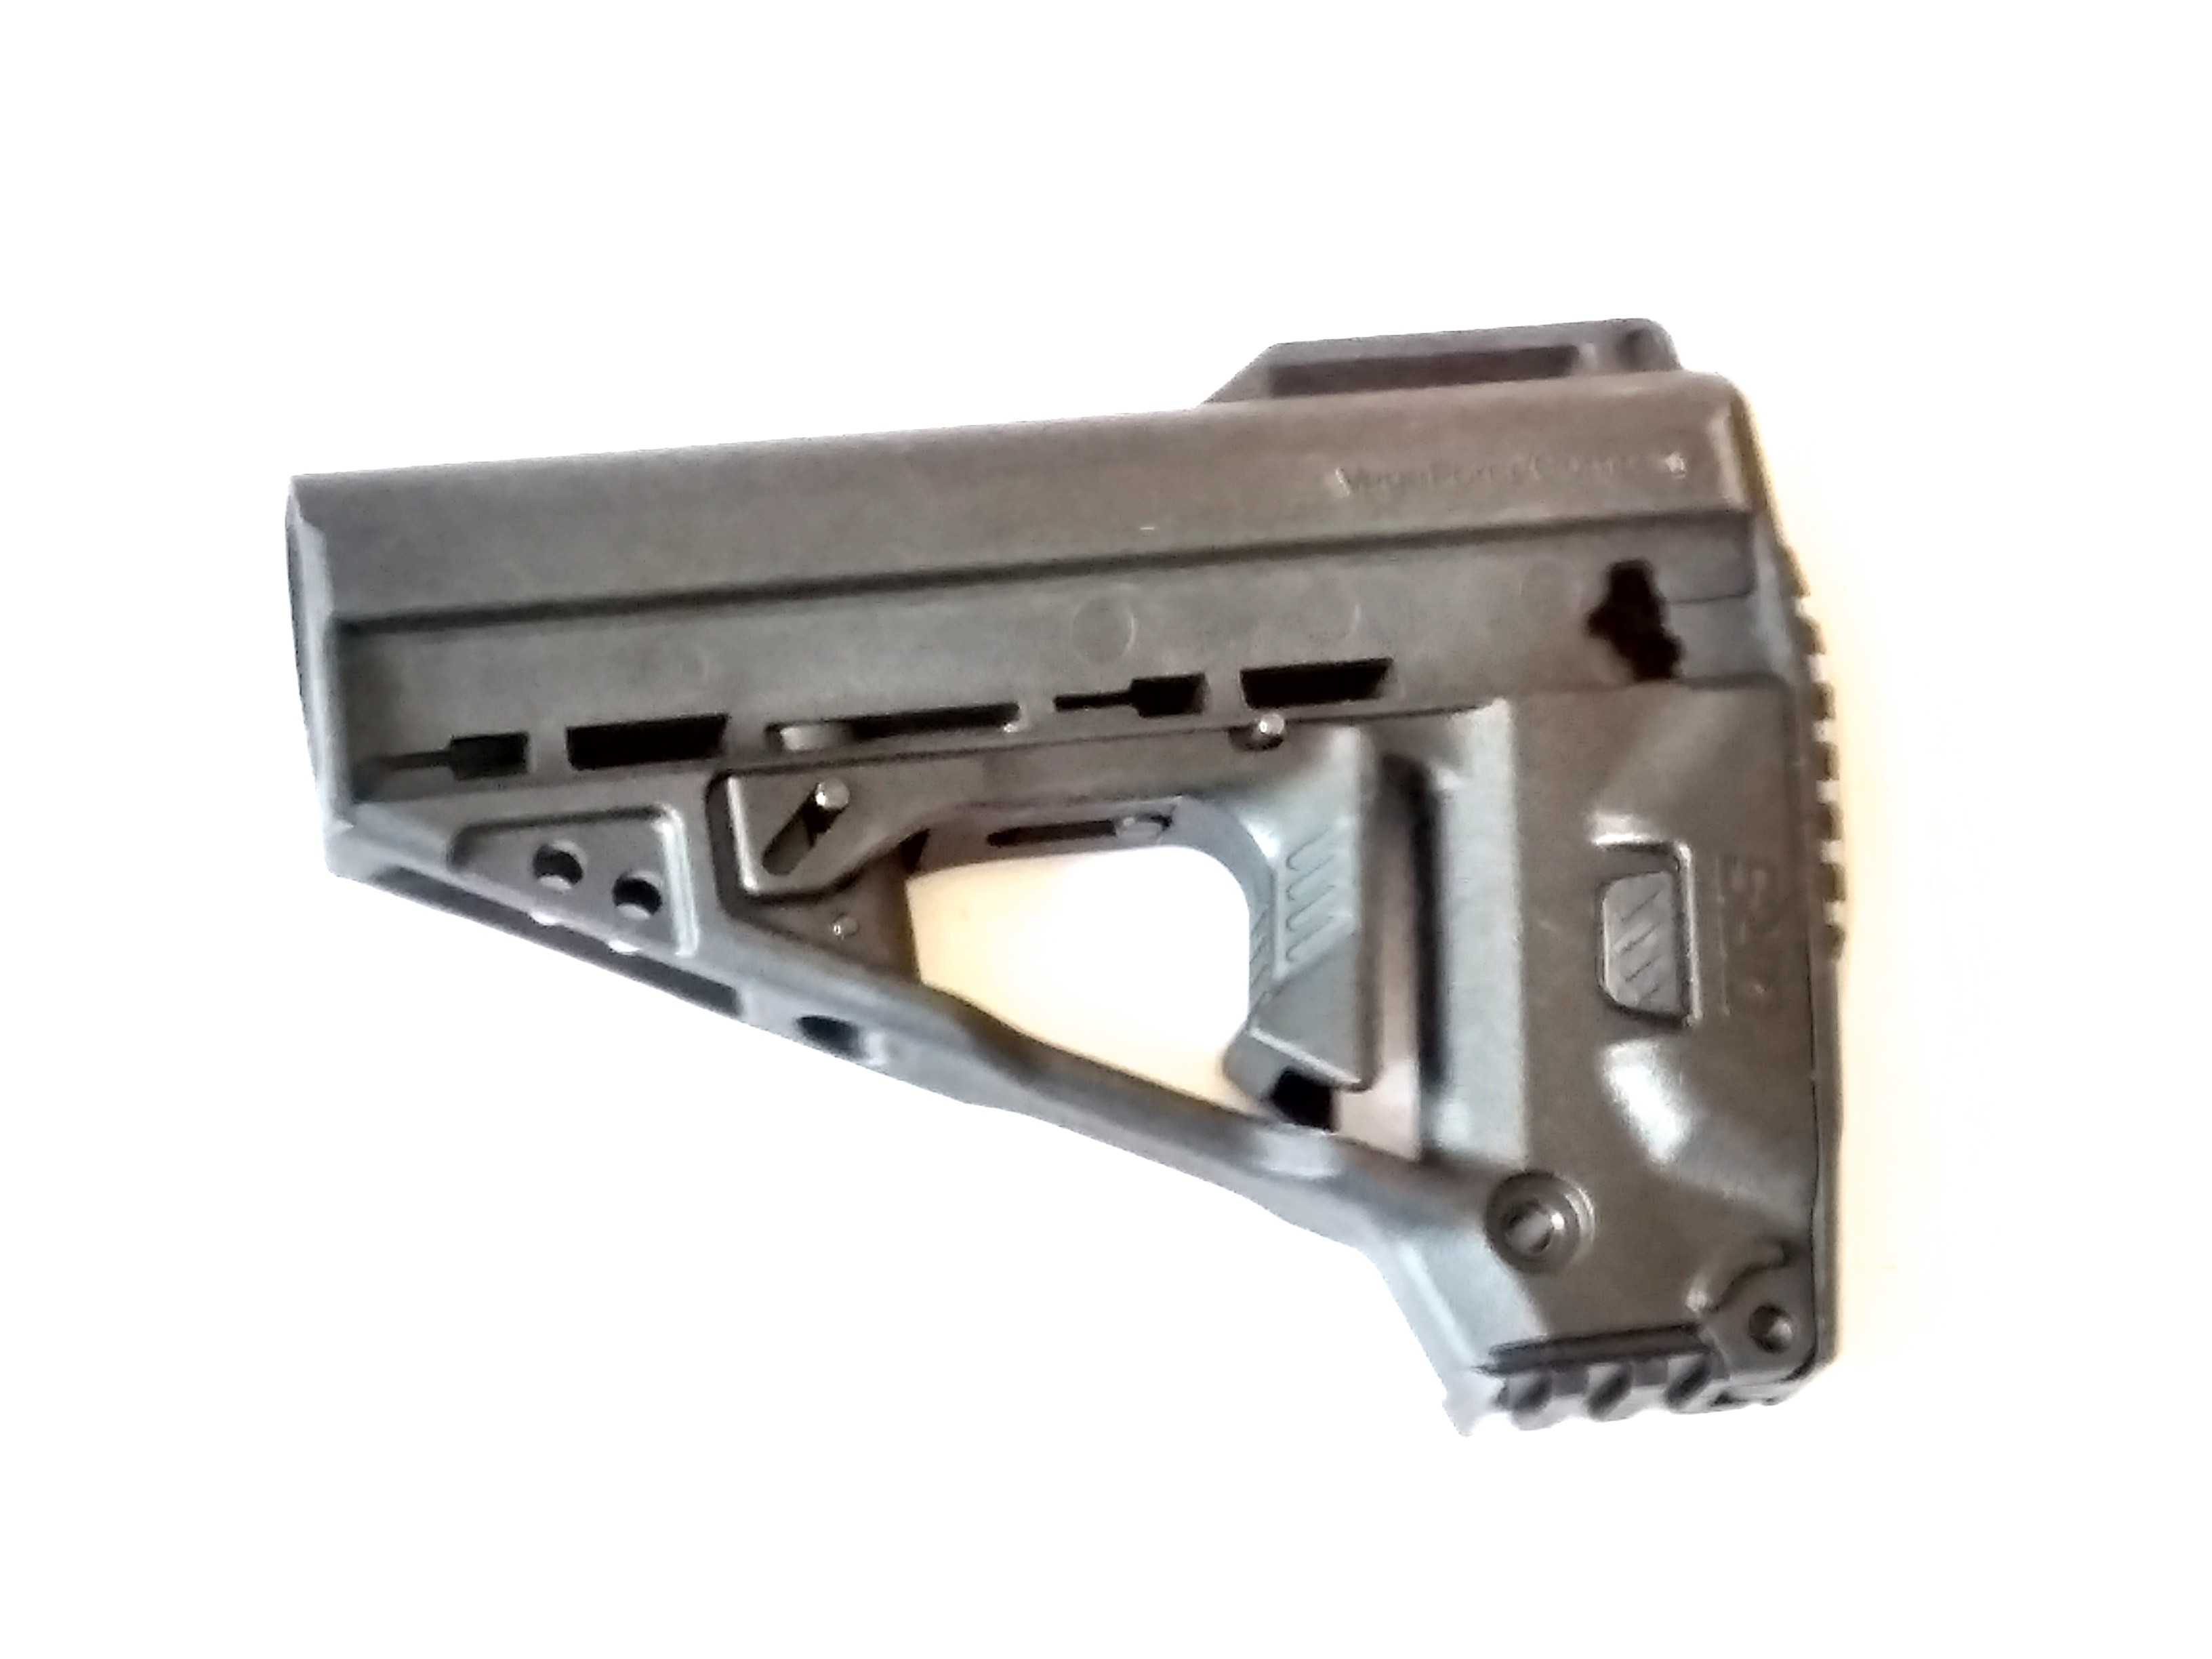 VFC (QRS) Stock for M4, M16, AR15 Style Airsoft Rifles